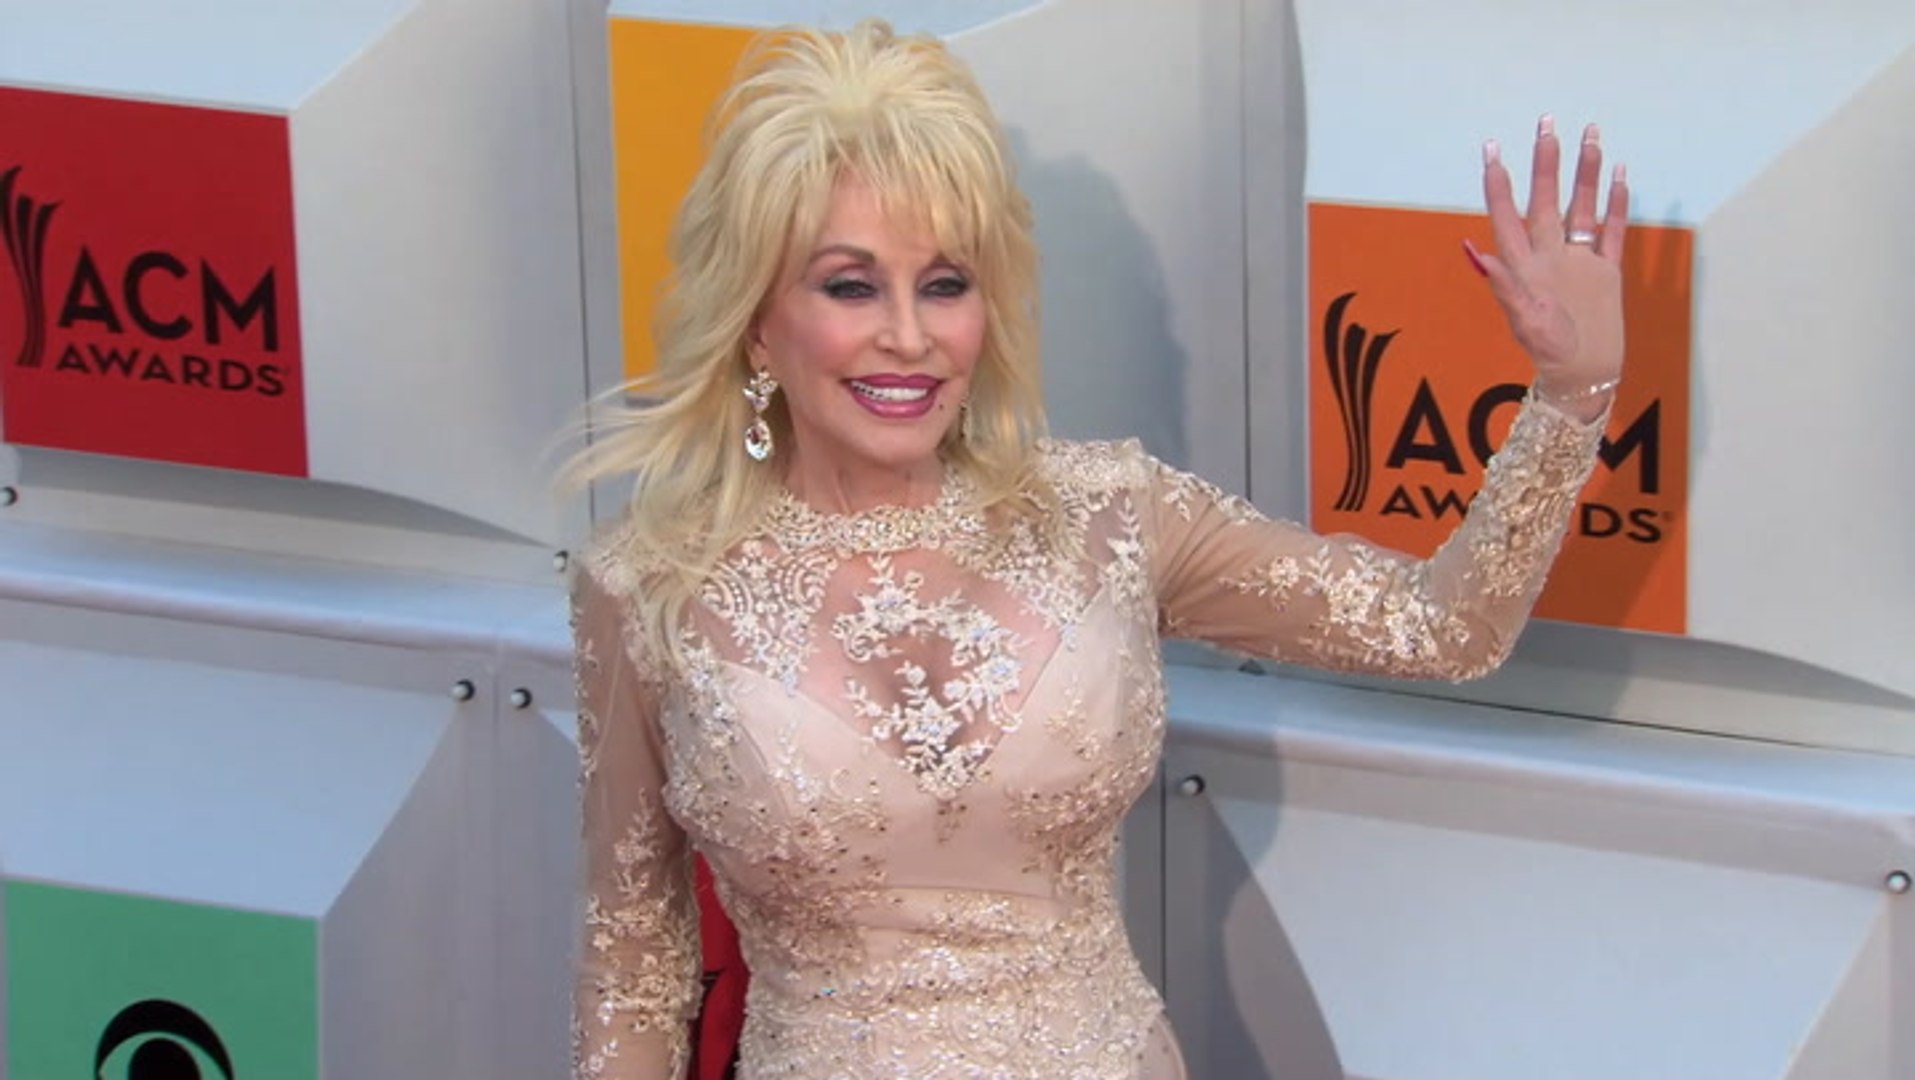 Dolly Parton and Eminem Inducted Into Rock & Roll Hall of Fame’s Class of 2022